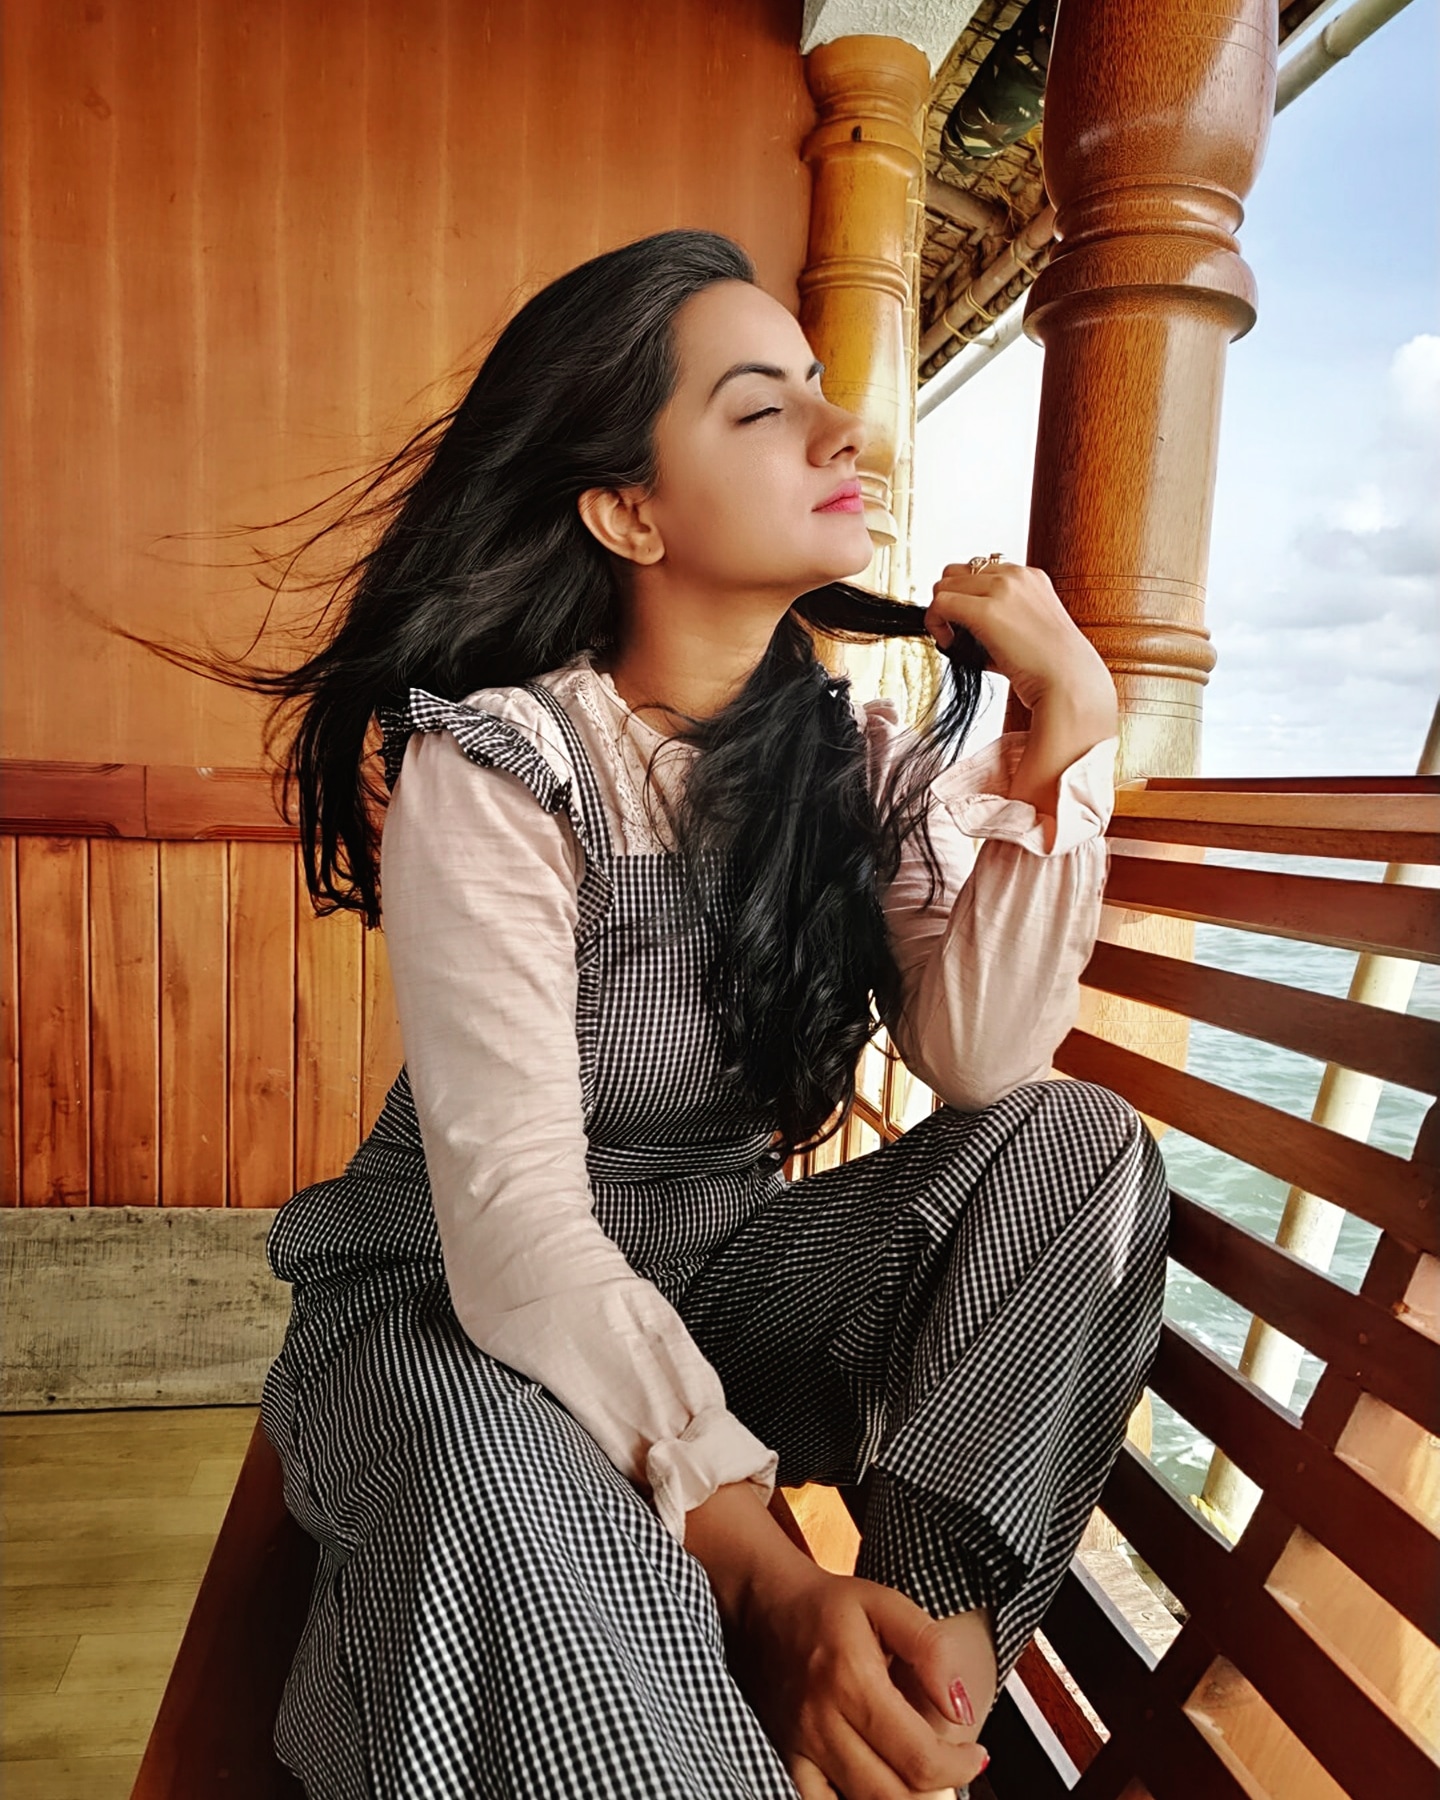 Aastha Chaudhary: For me, travelling is happiness